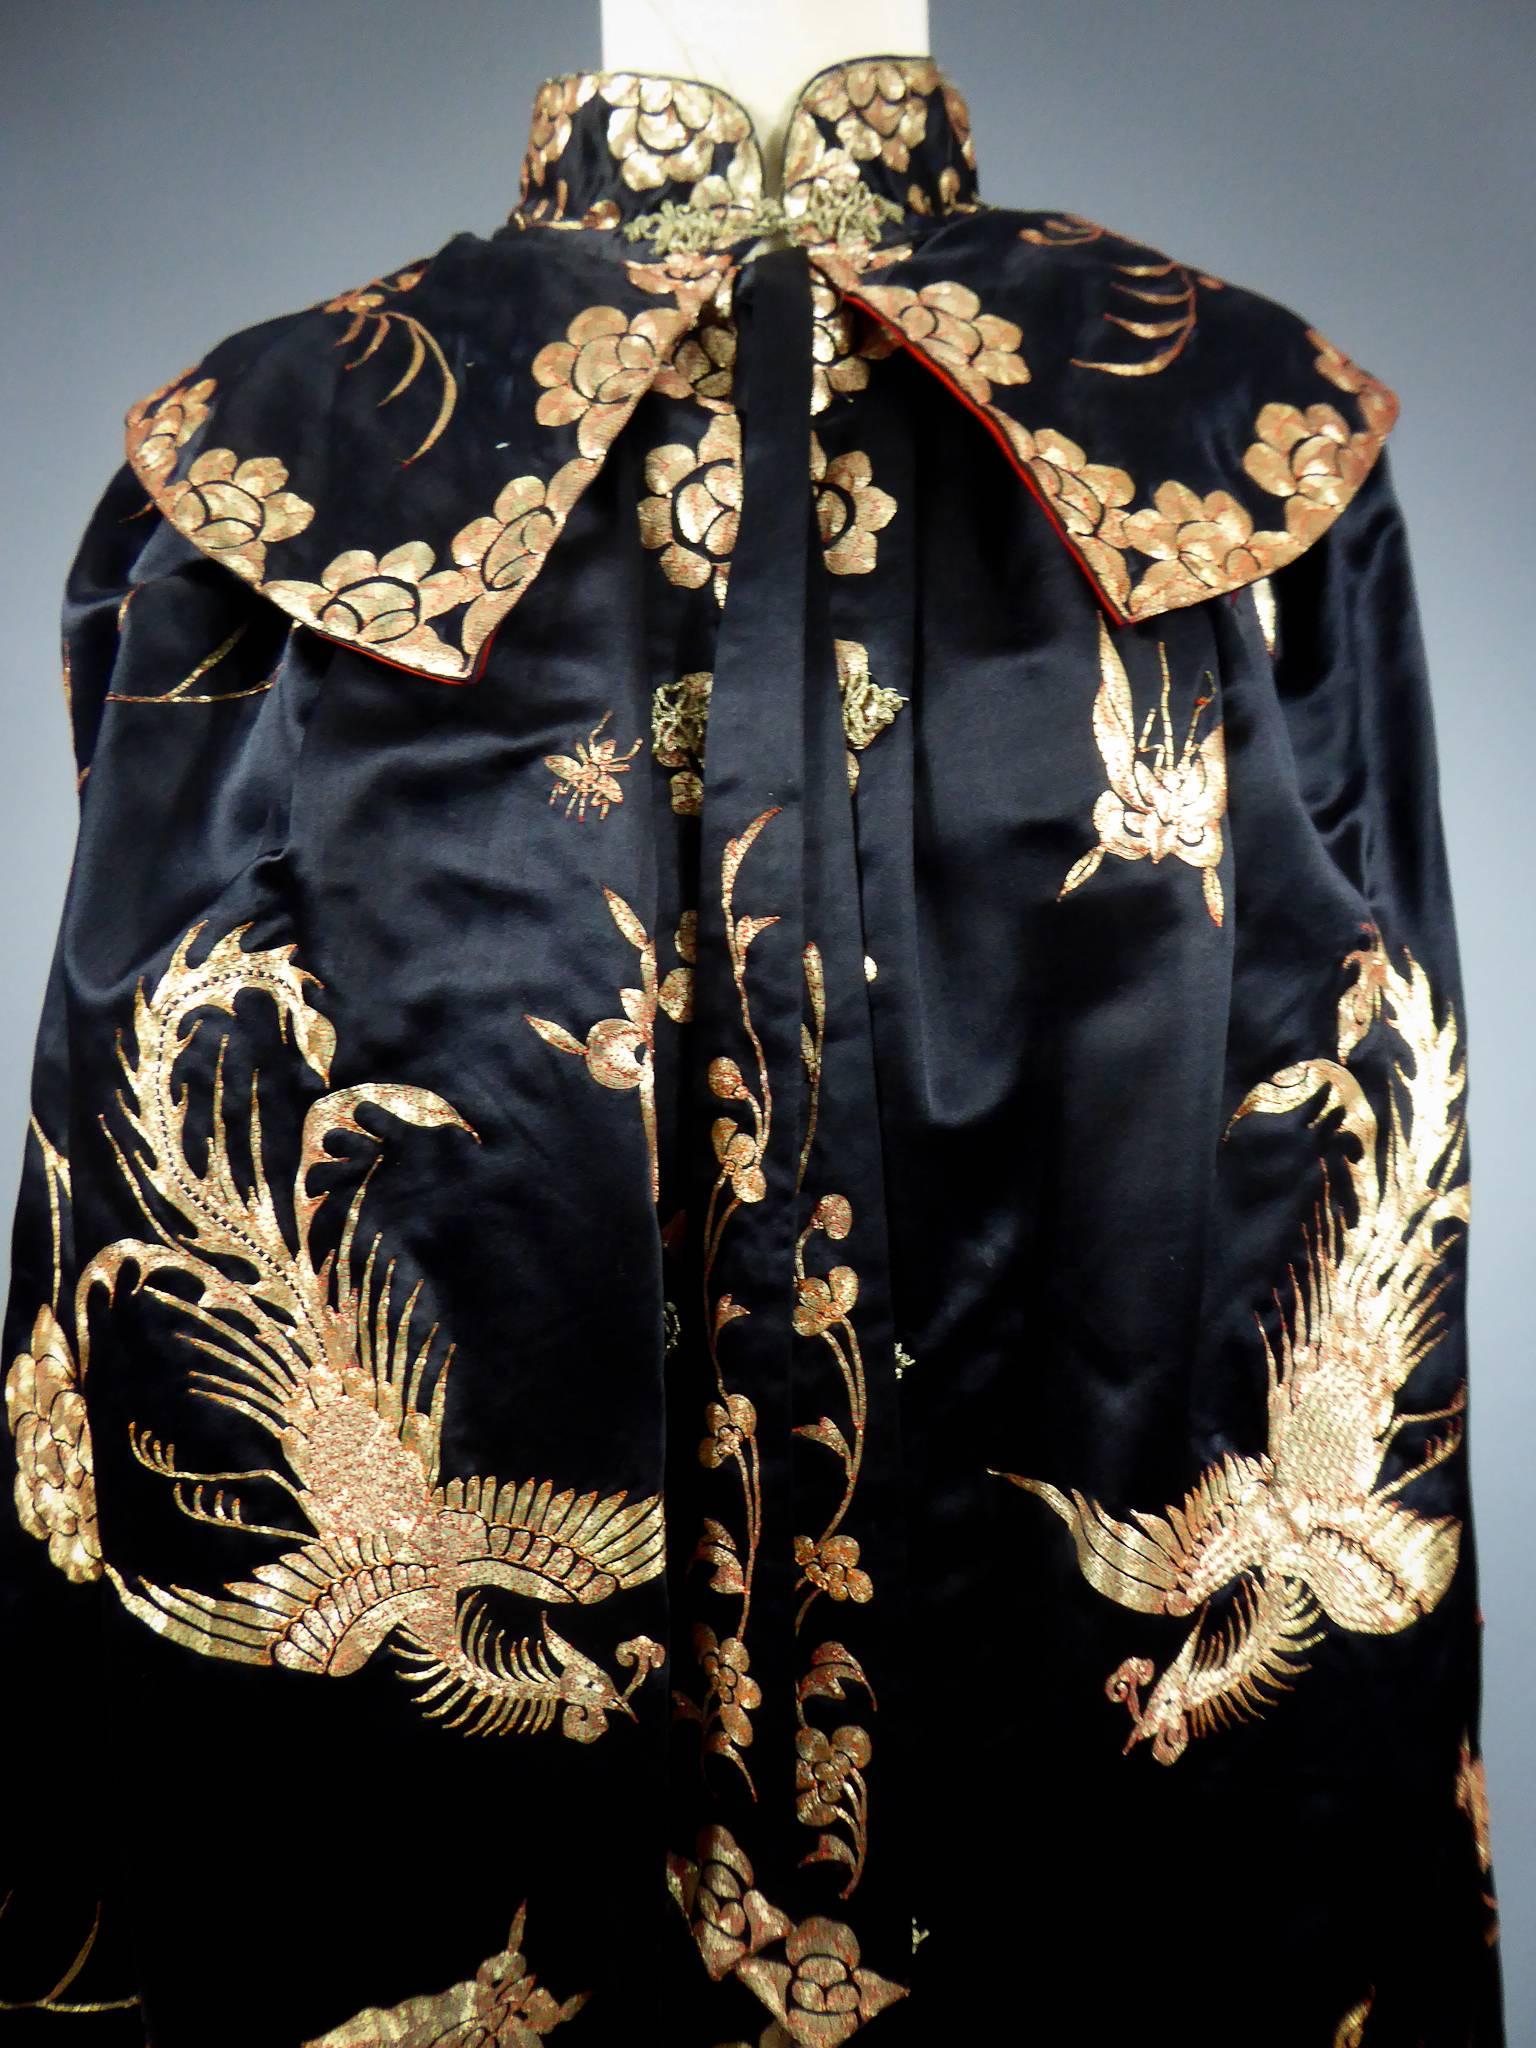 First half of the 20th century
China for European fashion
Amazing cape or ball coat embroidered in China for European fashion circa 1920 (?). Black waxed satin delicately embroidered with gold threads with a paper core, attached to the red thread.